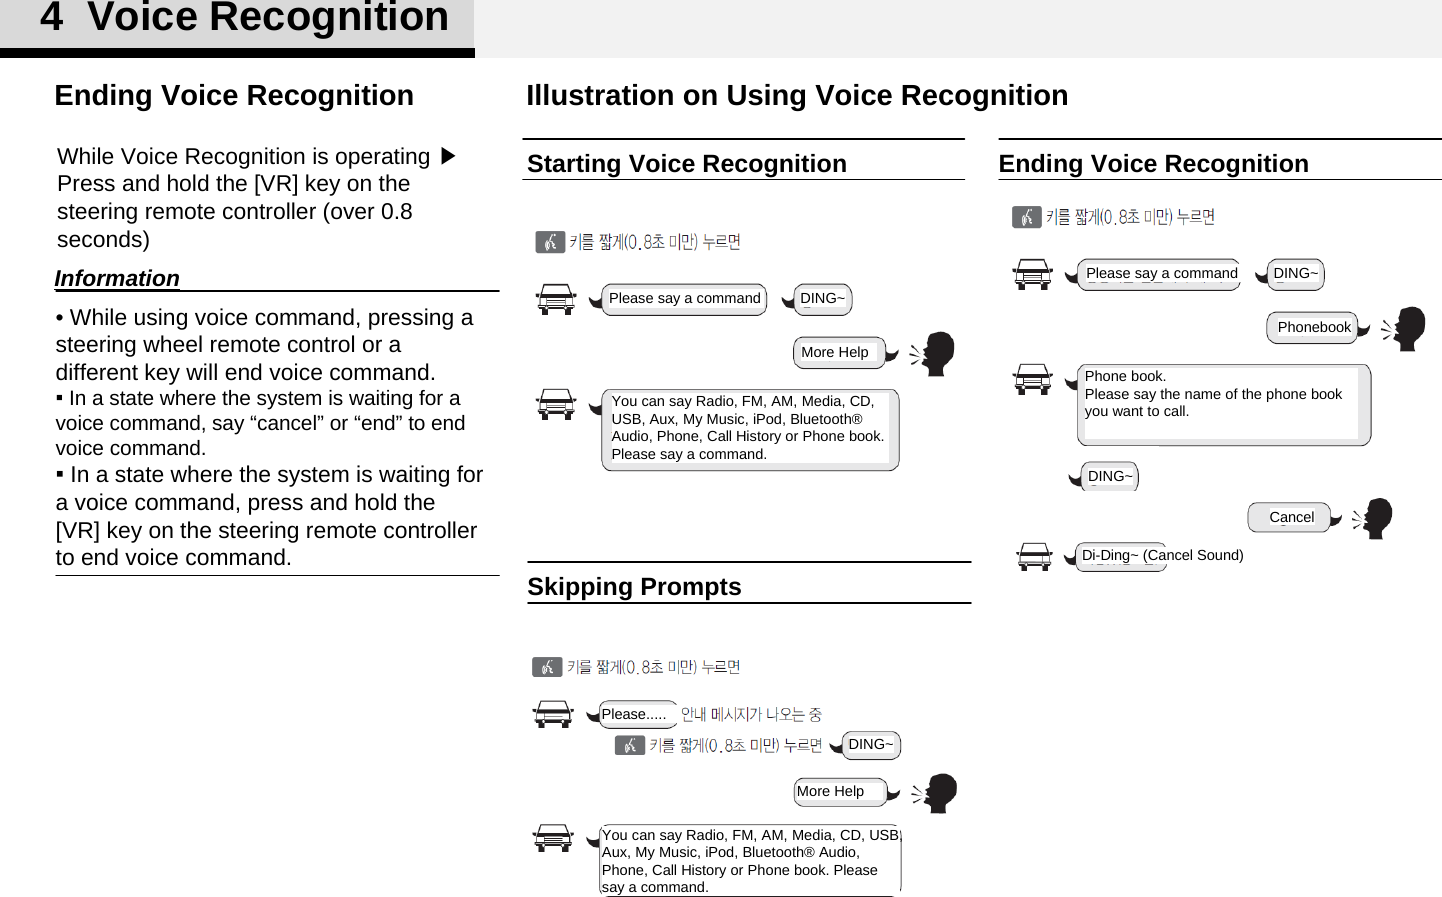 Illustration on Using Voice RecognitionStarting Voice RecognitionPlease say a command DING~More HelpYou can say Radio, FM, AM, Media, CD, USB, Aux, My Music, iPod, Bluetooth® Audio, Phone, Call History or Phone book. Please say a command.Skipping PromptsPlease.....DING~More HelpYou can say Radio, FM, AM, Media, CD, USB, Aux, My Music, iPod, Bluetooth® Audio, Phone, Call History or Phone book. Please say a command.4  Voice RecognitionEnding Voice RecognitionPlease say a command DING~PhonebookPhone book.Please say the name of the phone book you want to call.DING~CancelDi-Ding~ (Cancel Sound)While Voice Recognition is operating ▶Press and hold the [VR] key on the steering remote controller (over 0.8 seconds)• While using voice command, pressing a steering wheel remote control or a different key will end voice command.▪ In a state where the system is waiting for a voice command, say “cancel” or “end” to end voice command.▪ In a state where the system is waiting for a voice command, press and hold the [VR] key on the steering remote controller to end voice command.InformationEnding Voice Recognition